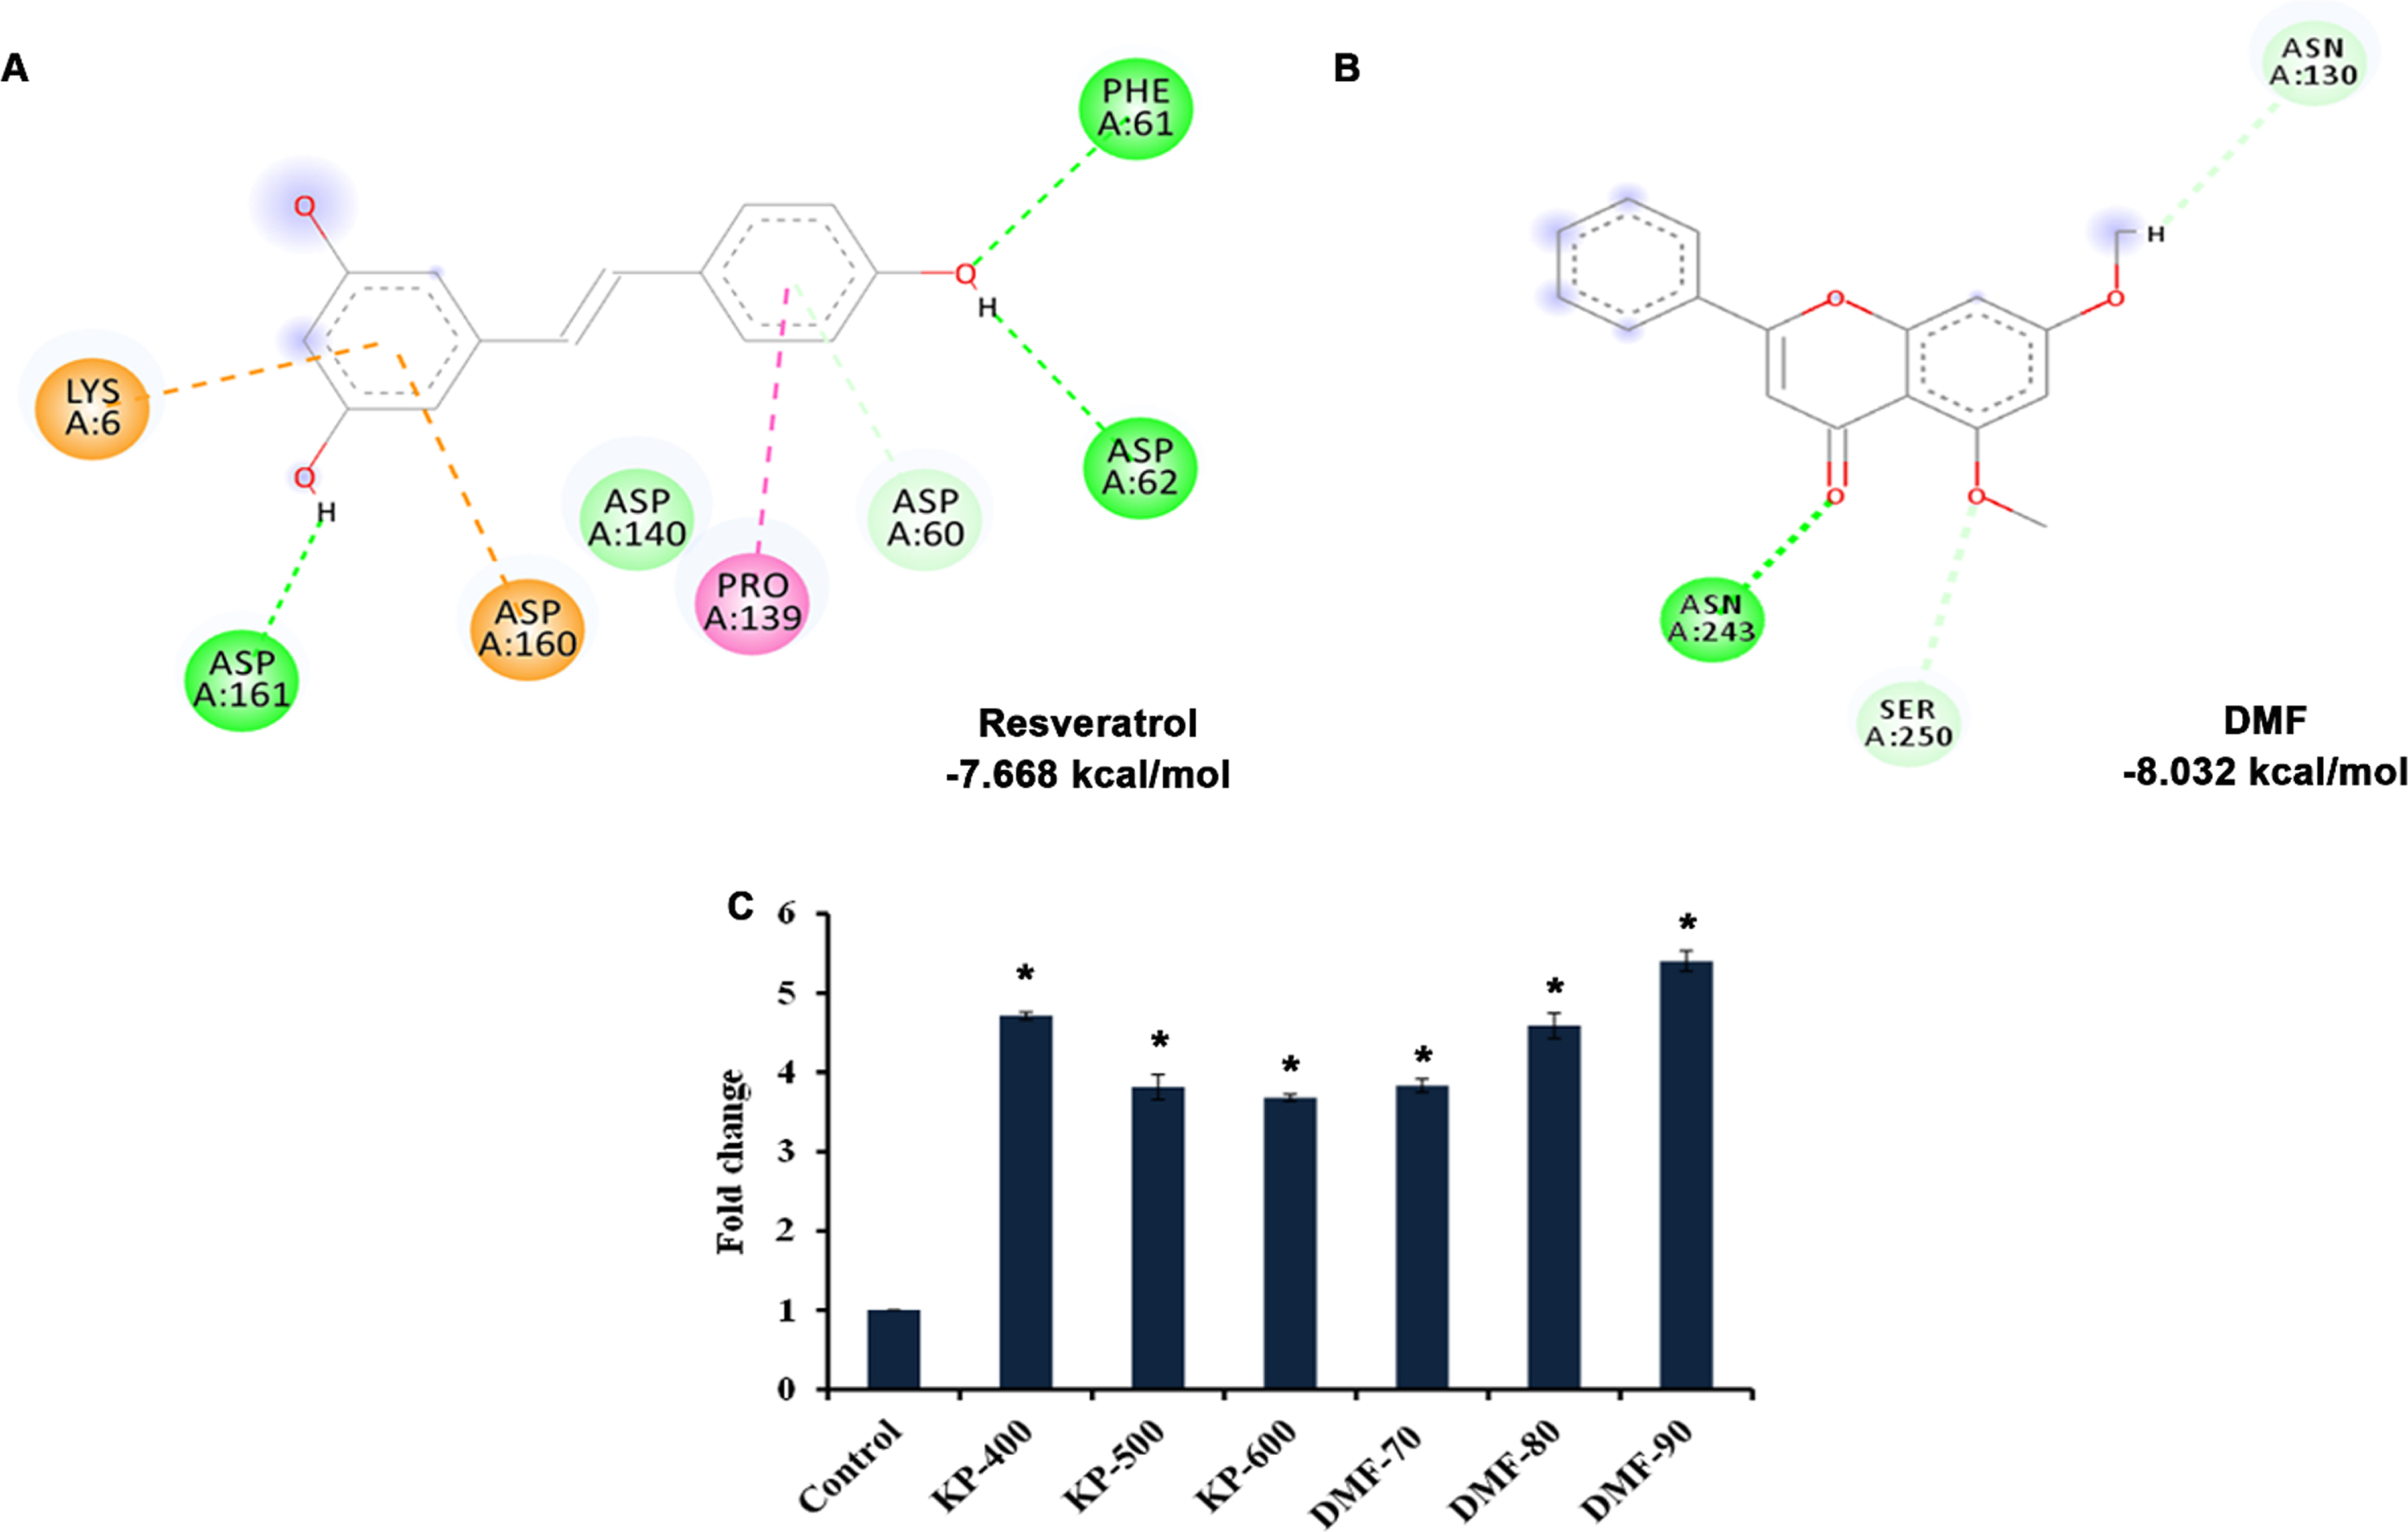 In silico analysis showed activation of DAF-16 (A) Resveratrol showing binding affinity of –7.668 kcal/mol towards DAF-16 (B) DMF showing binding affinity of –8.032 kcal/mol towards DAF-16 (C) KP and DMF significantly (p <  0.05) induced the expression of daf-16 in C. elegans.